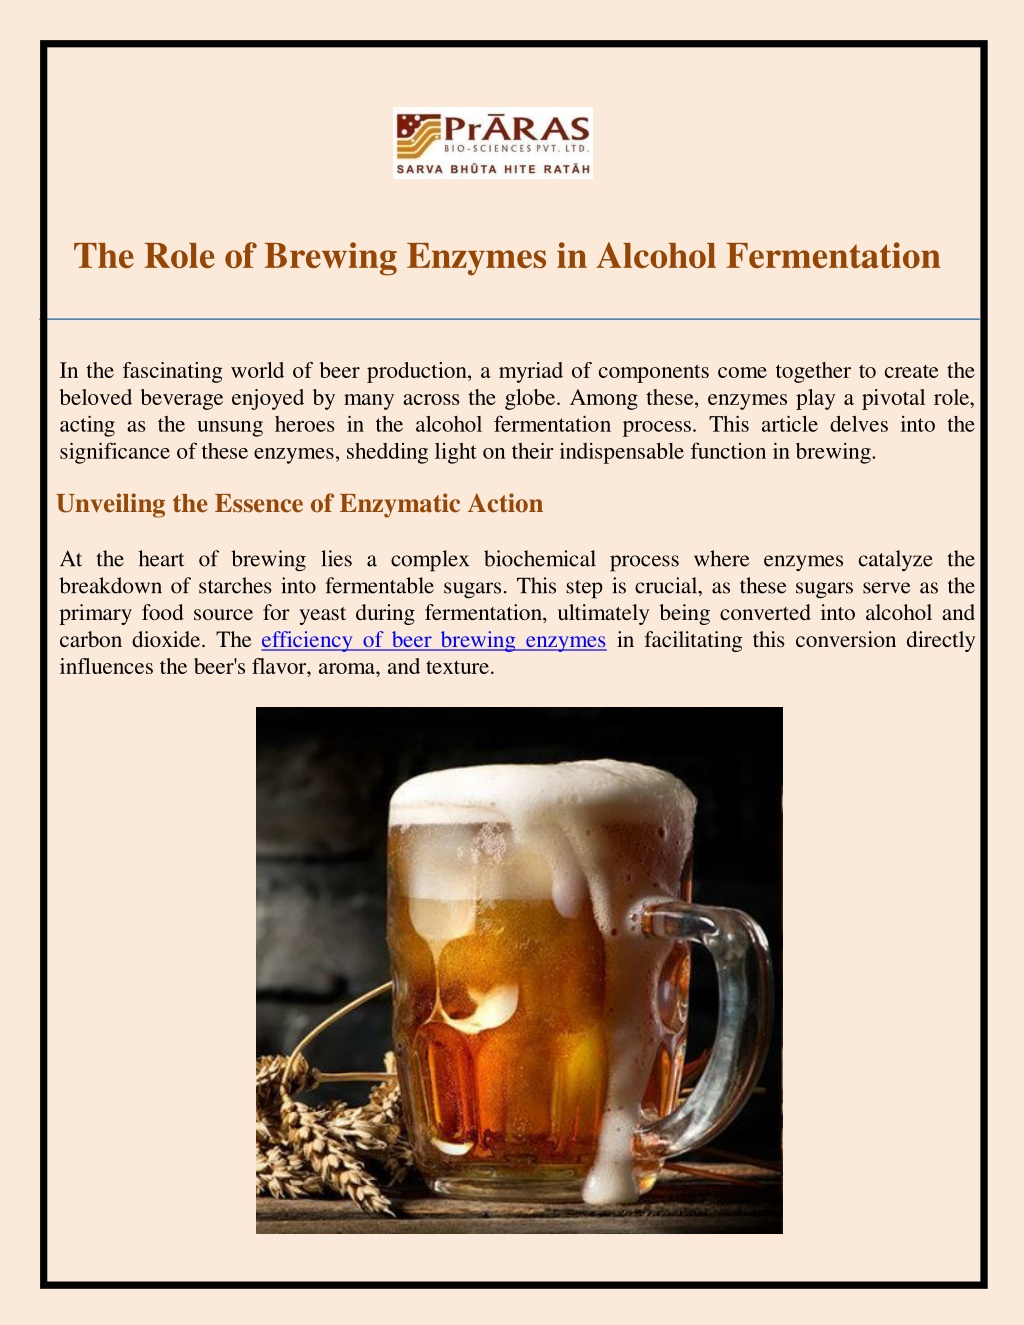 PPT - The Role of Brewing Enzymes in Alcohol Fermentation PowerPoint ...